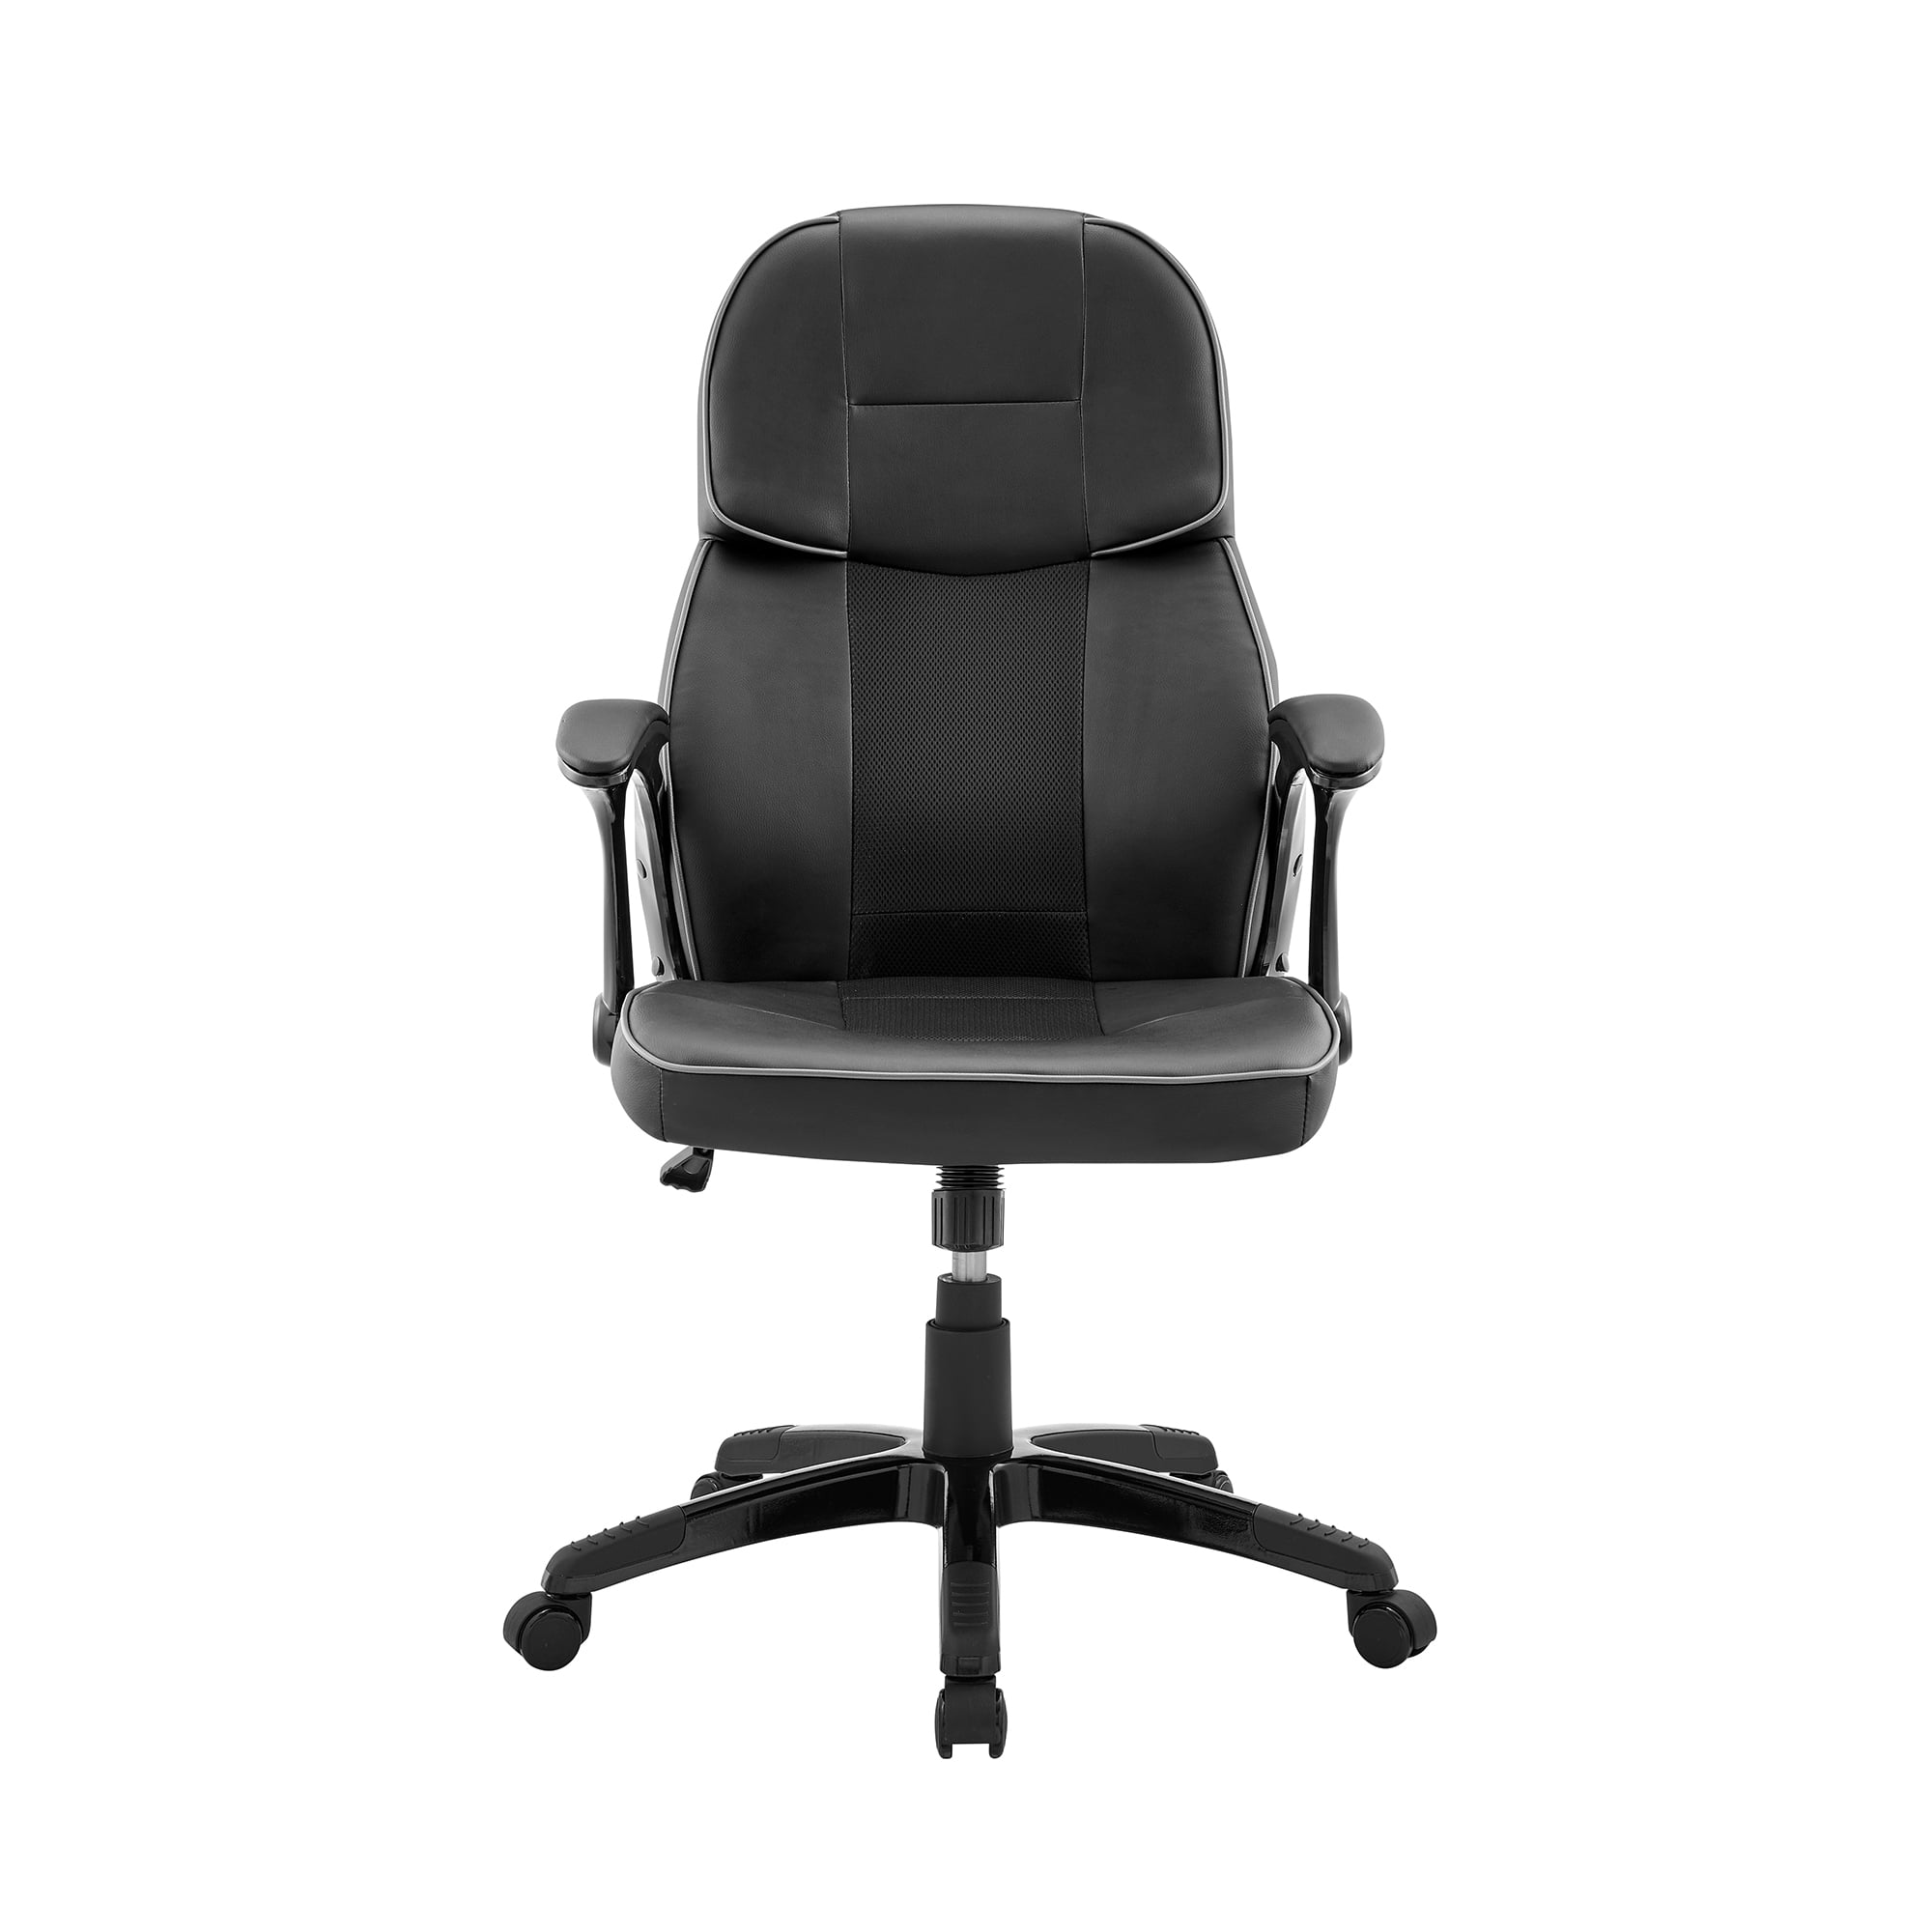 Picture of Armen Living LCBEGCGRYBLK Bender Adjustable Racing Gaming Chair in Black Faux Leather with Dark Grey Accents